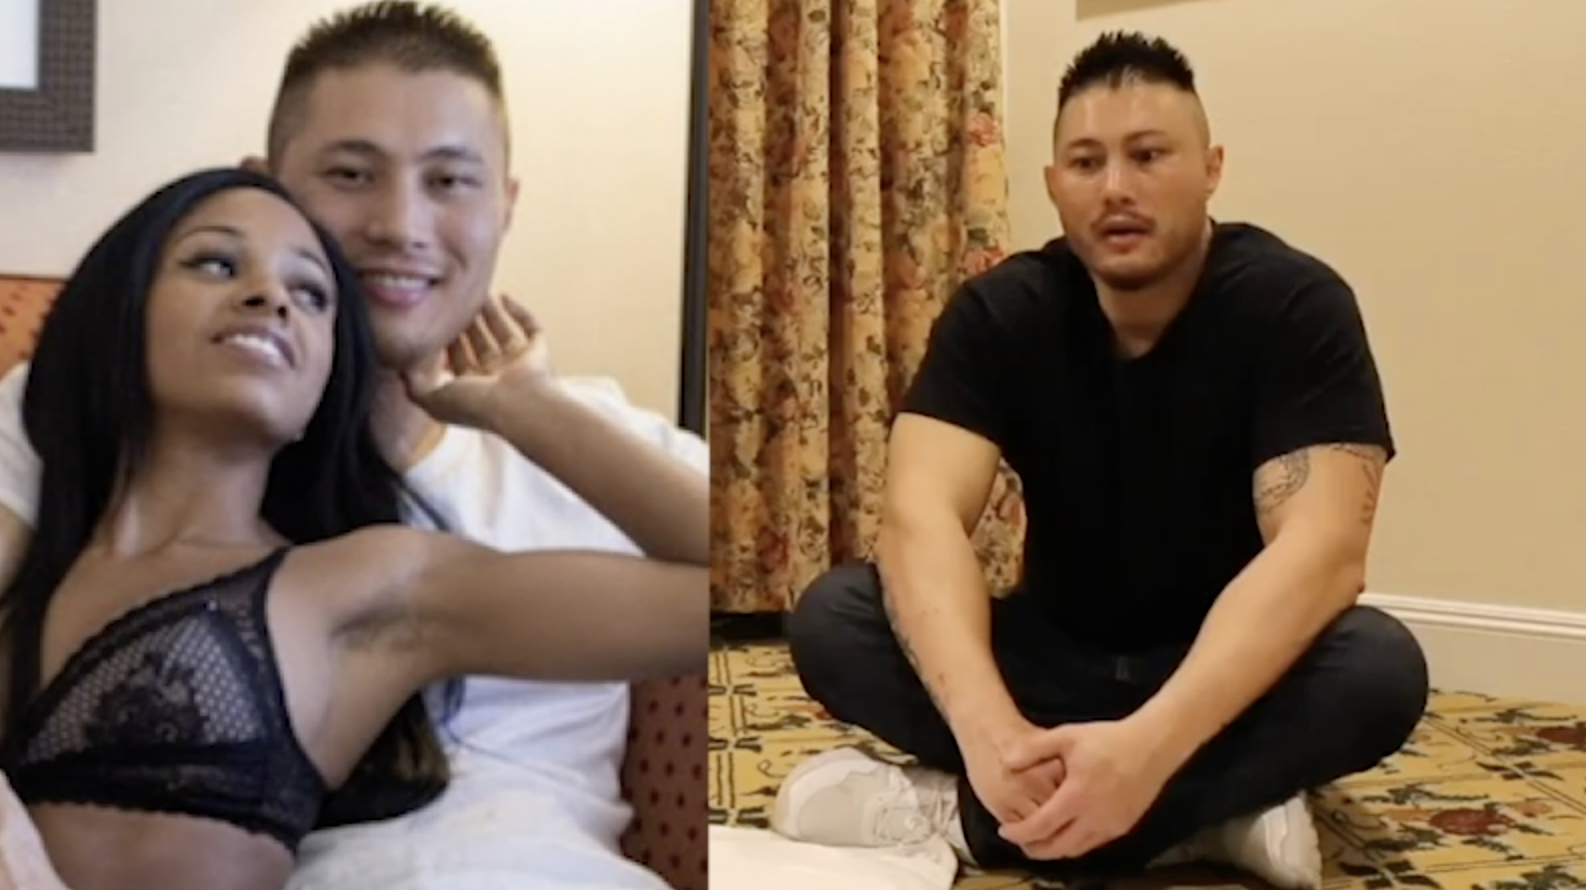 EXCLUSIVE: Pâ€Œoâ€Œrn Star Jeremy Long Pens Last Statement After Cutting Finger  Off and Retiring 'Forever'